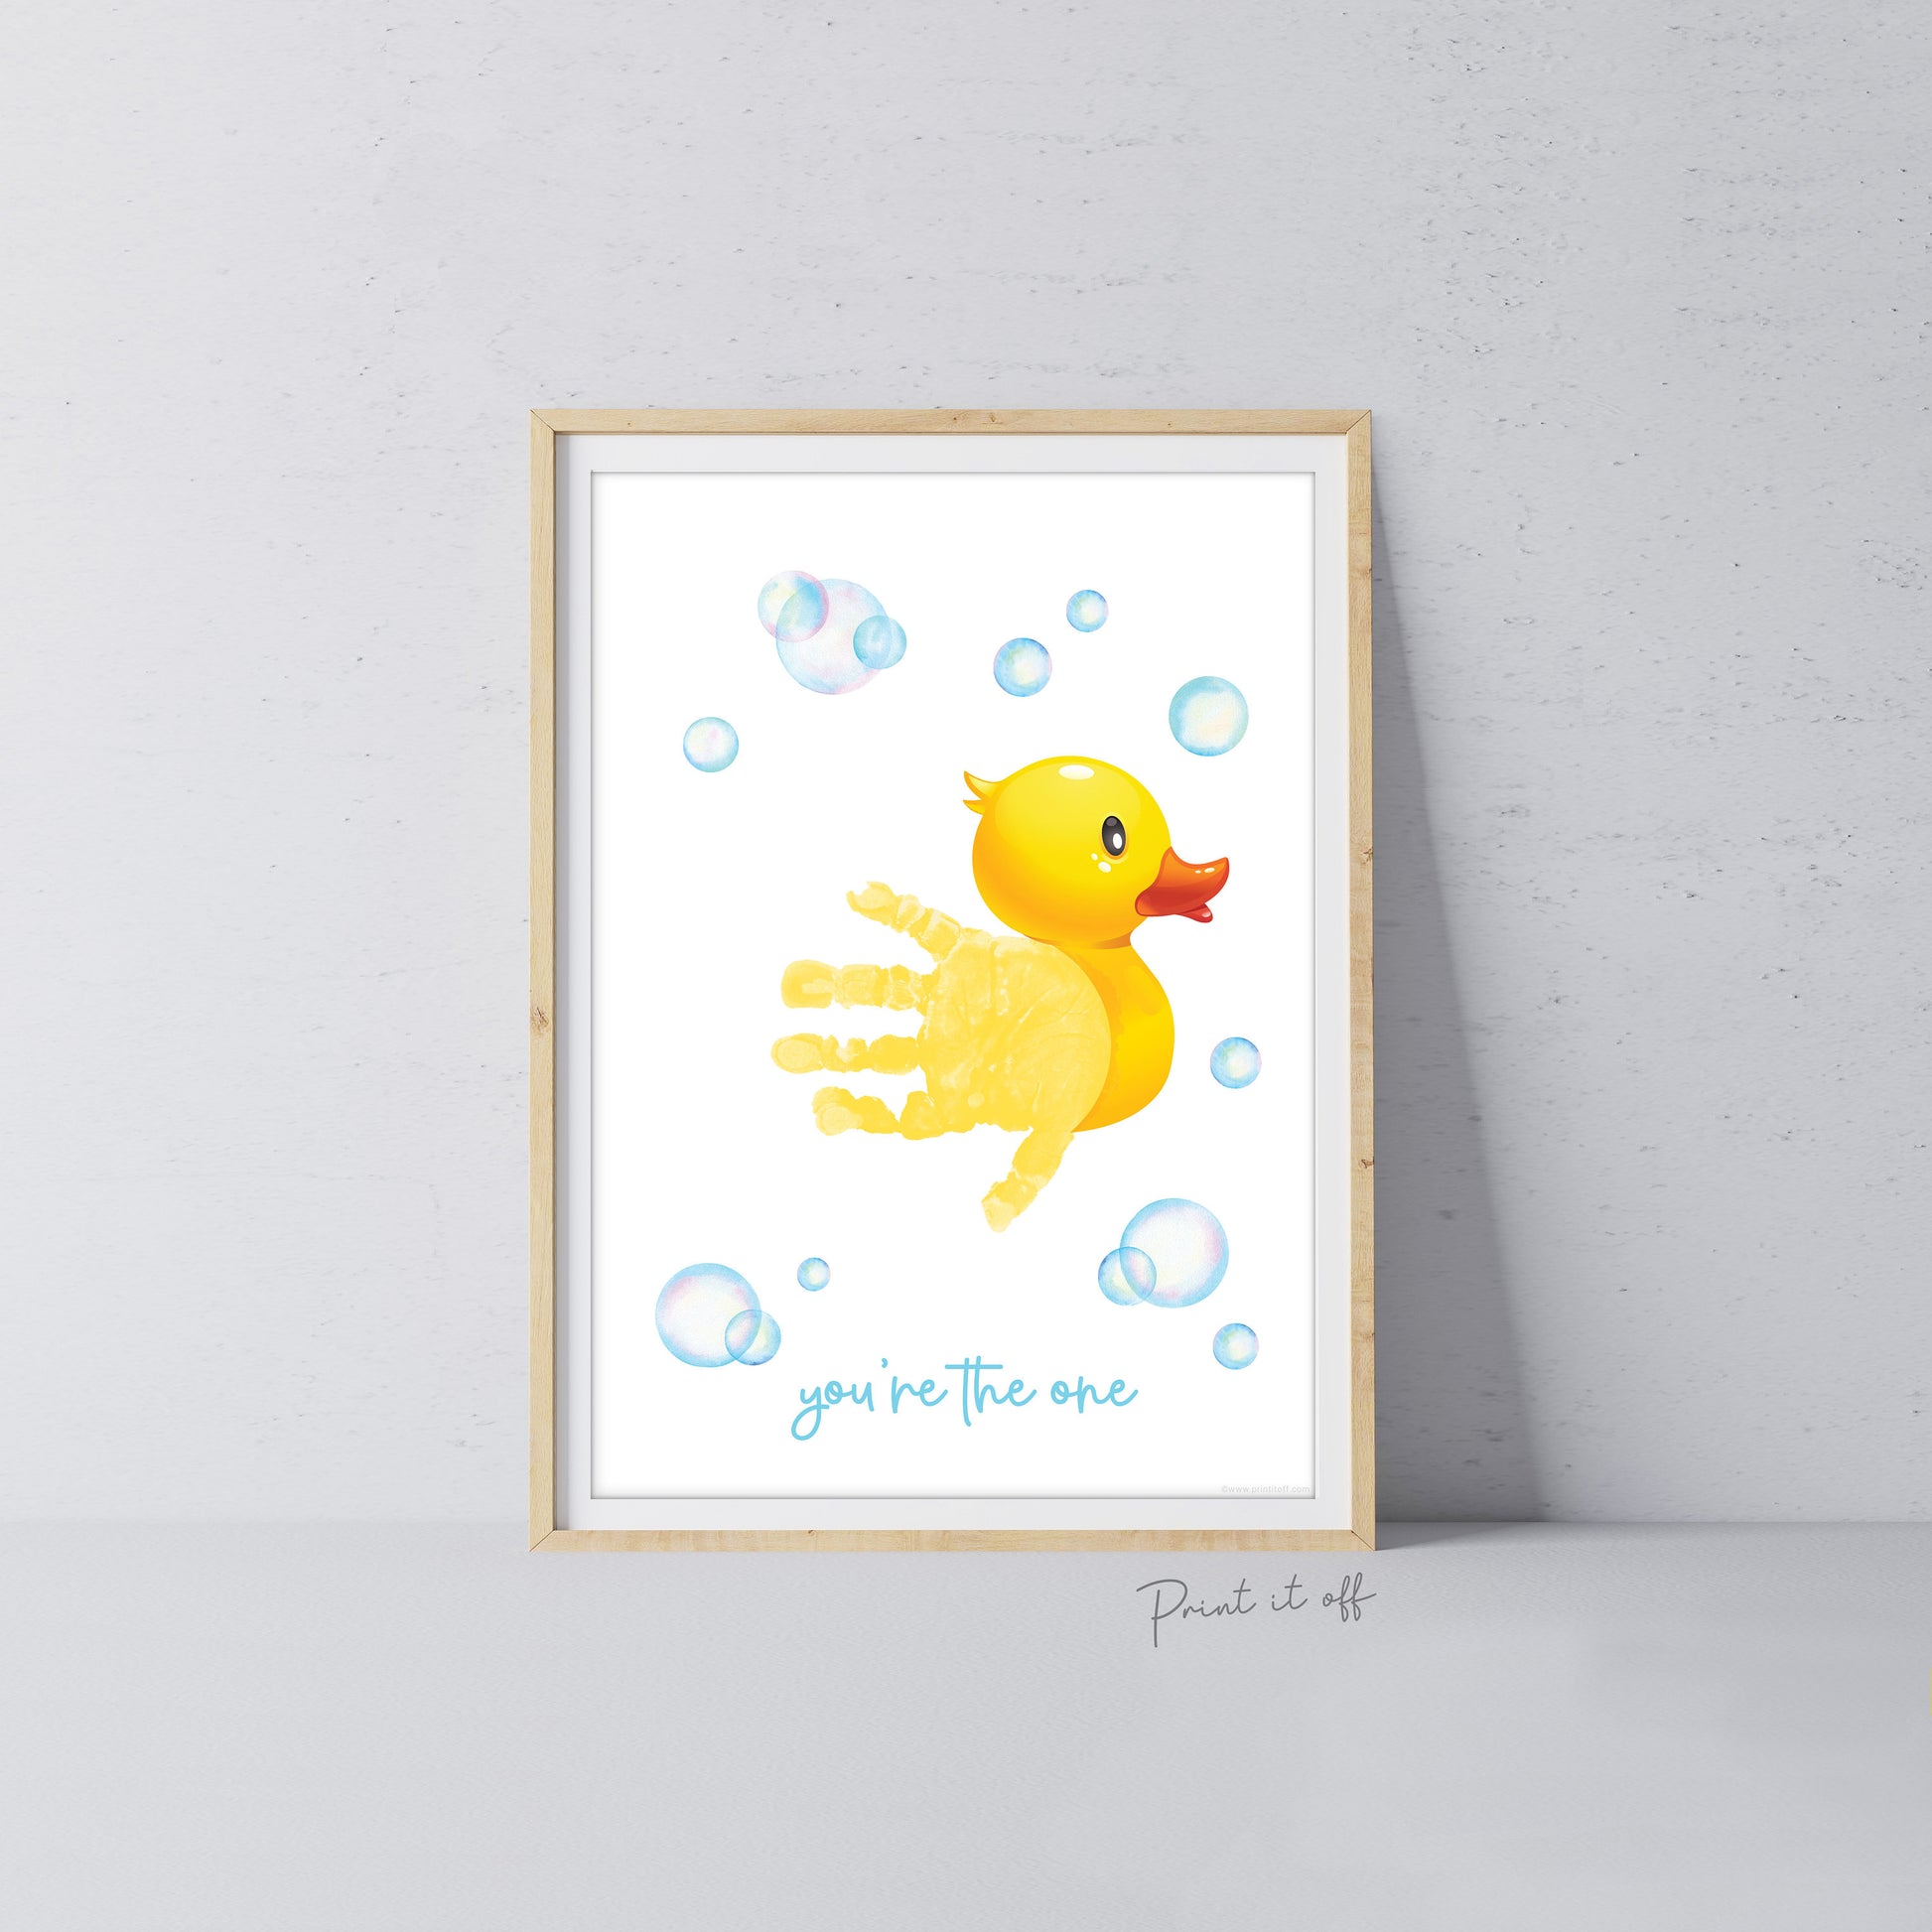 Printable Rubber Duck Paper Craft